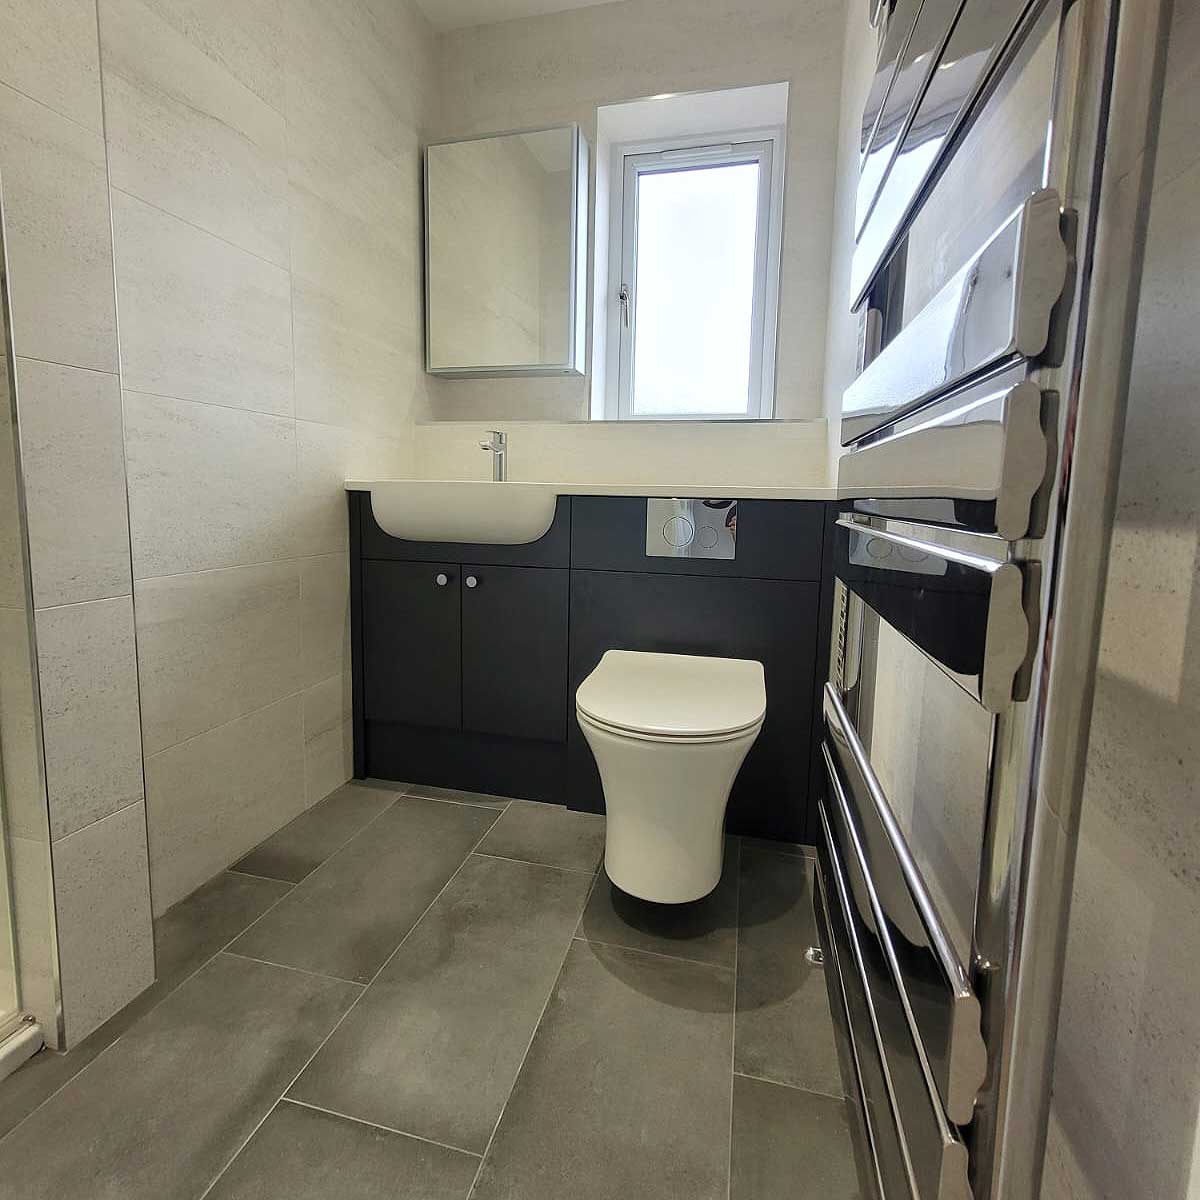 An enlarged and newly refurbished ensuite bathroom in Dorset by Room H2o